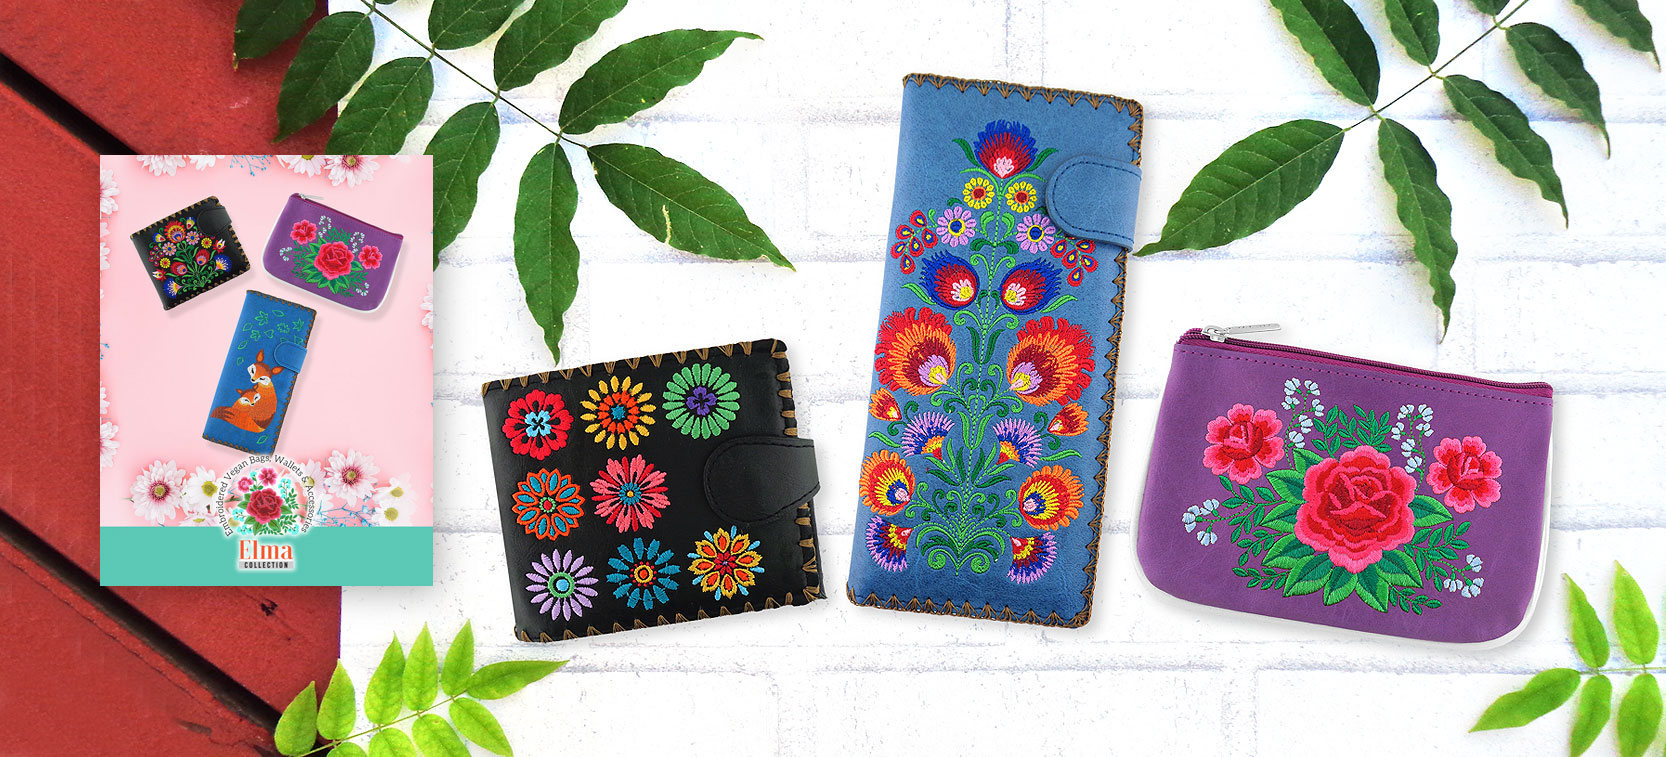 LAVISHY Elma collection design & wholesale embroidered vegan bags, wallets & accessories and gfits to gift shops, boutiques & book stores in Canada, USA and worldwide.